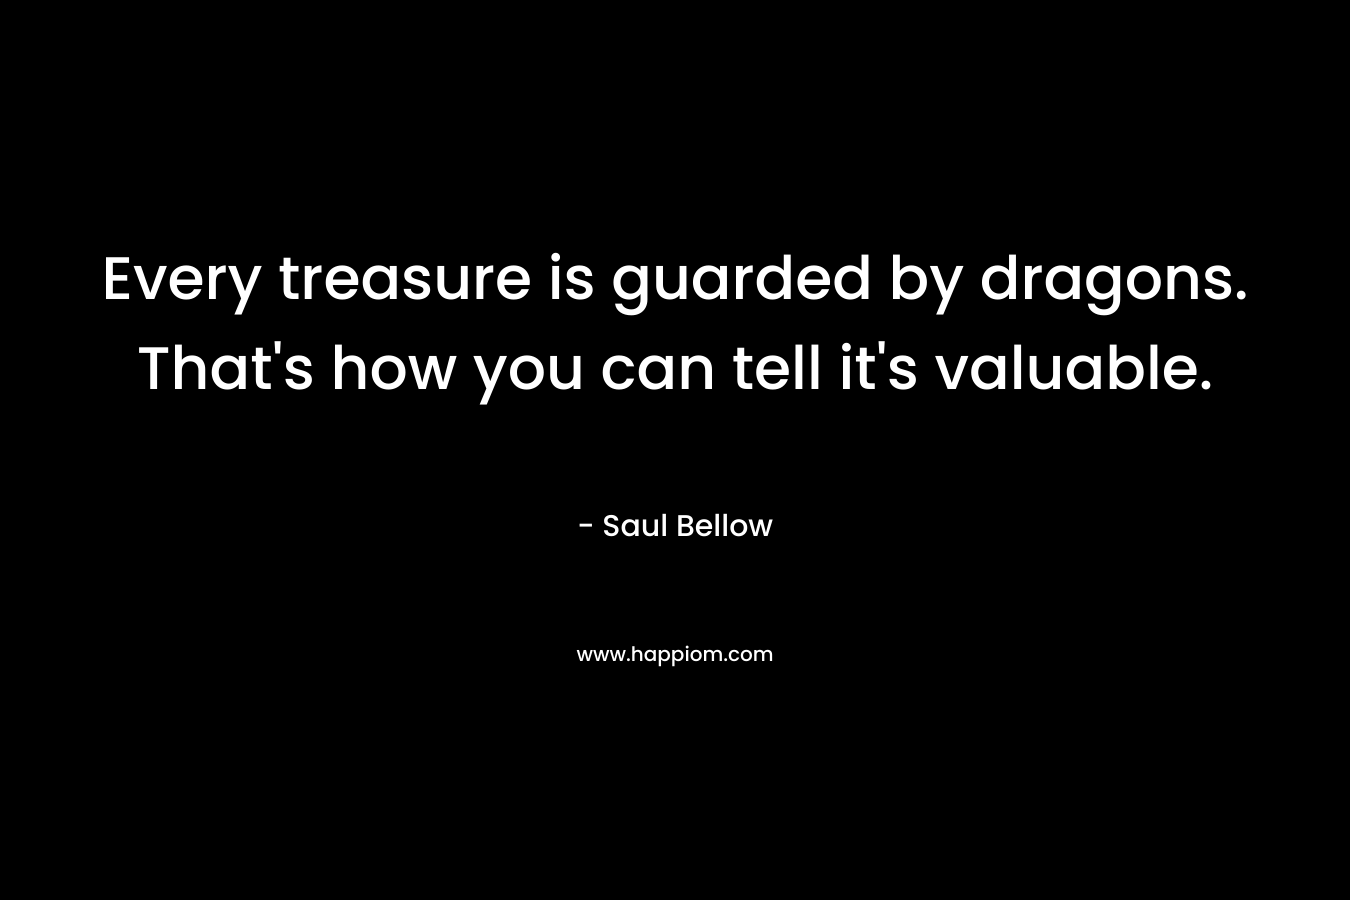 Every treasure is guarded by dragons. That's how you can tell it's valuable.